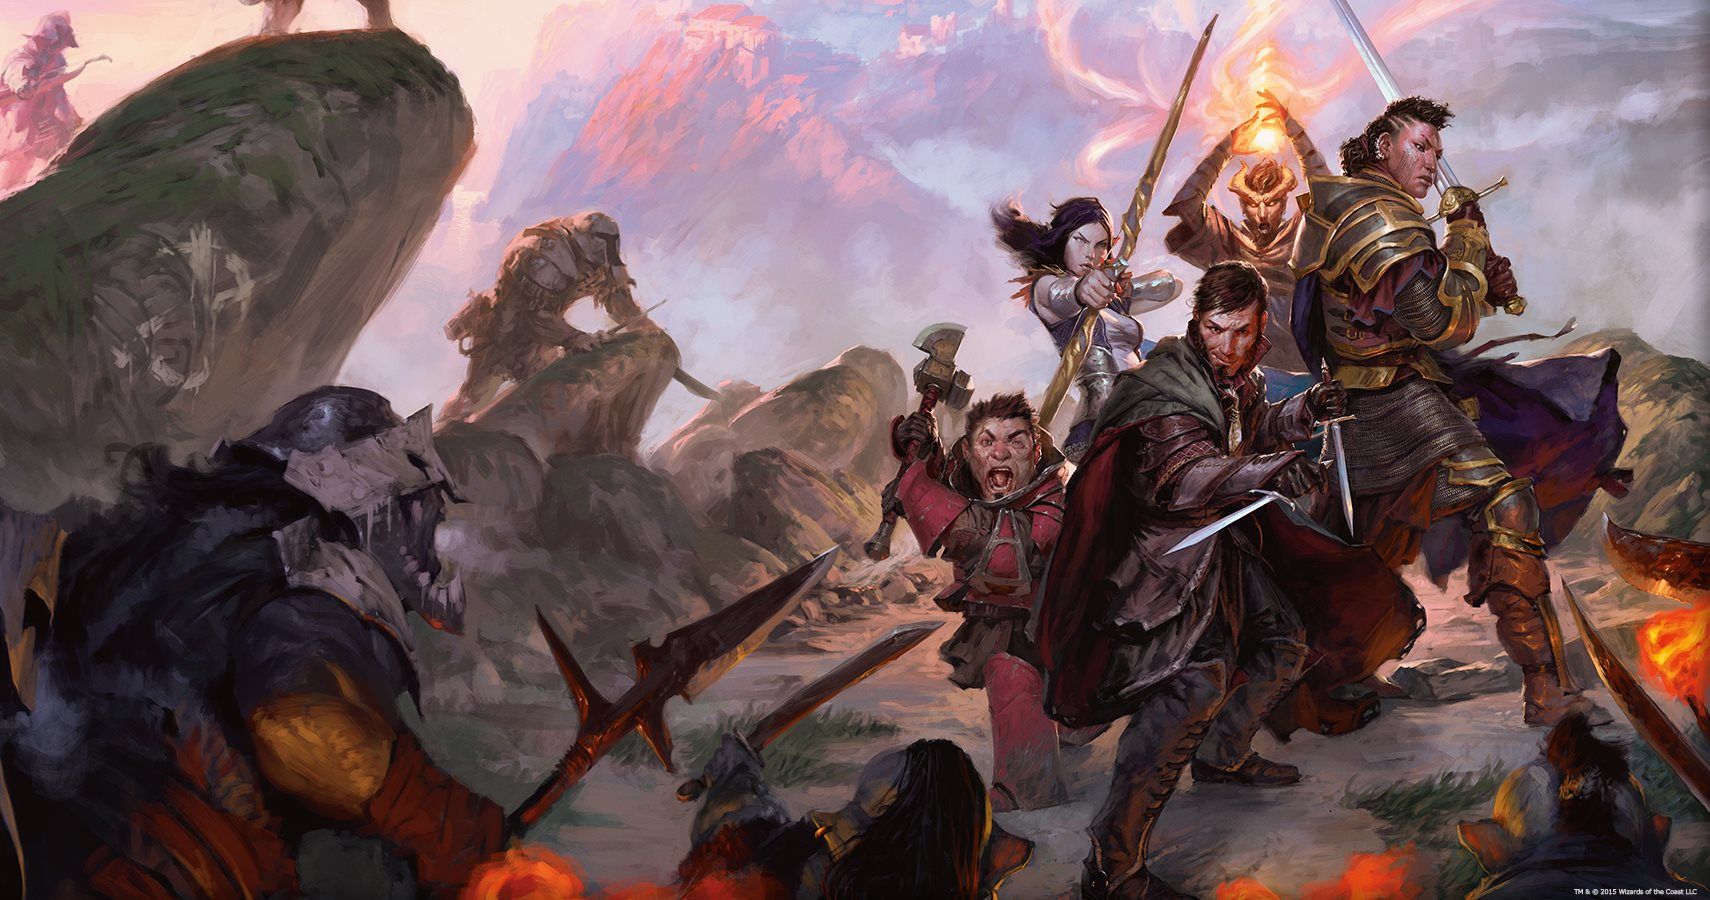 Hasbro CEO Is A Bit Confused, Thinks Dungeons & Dragons Is An eSport